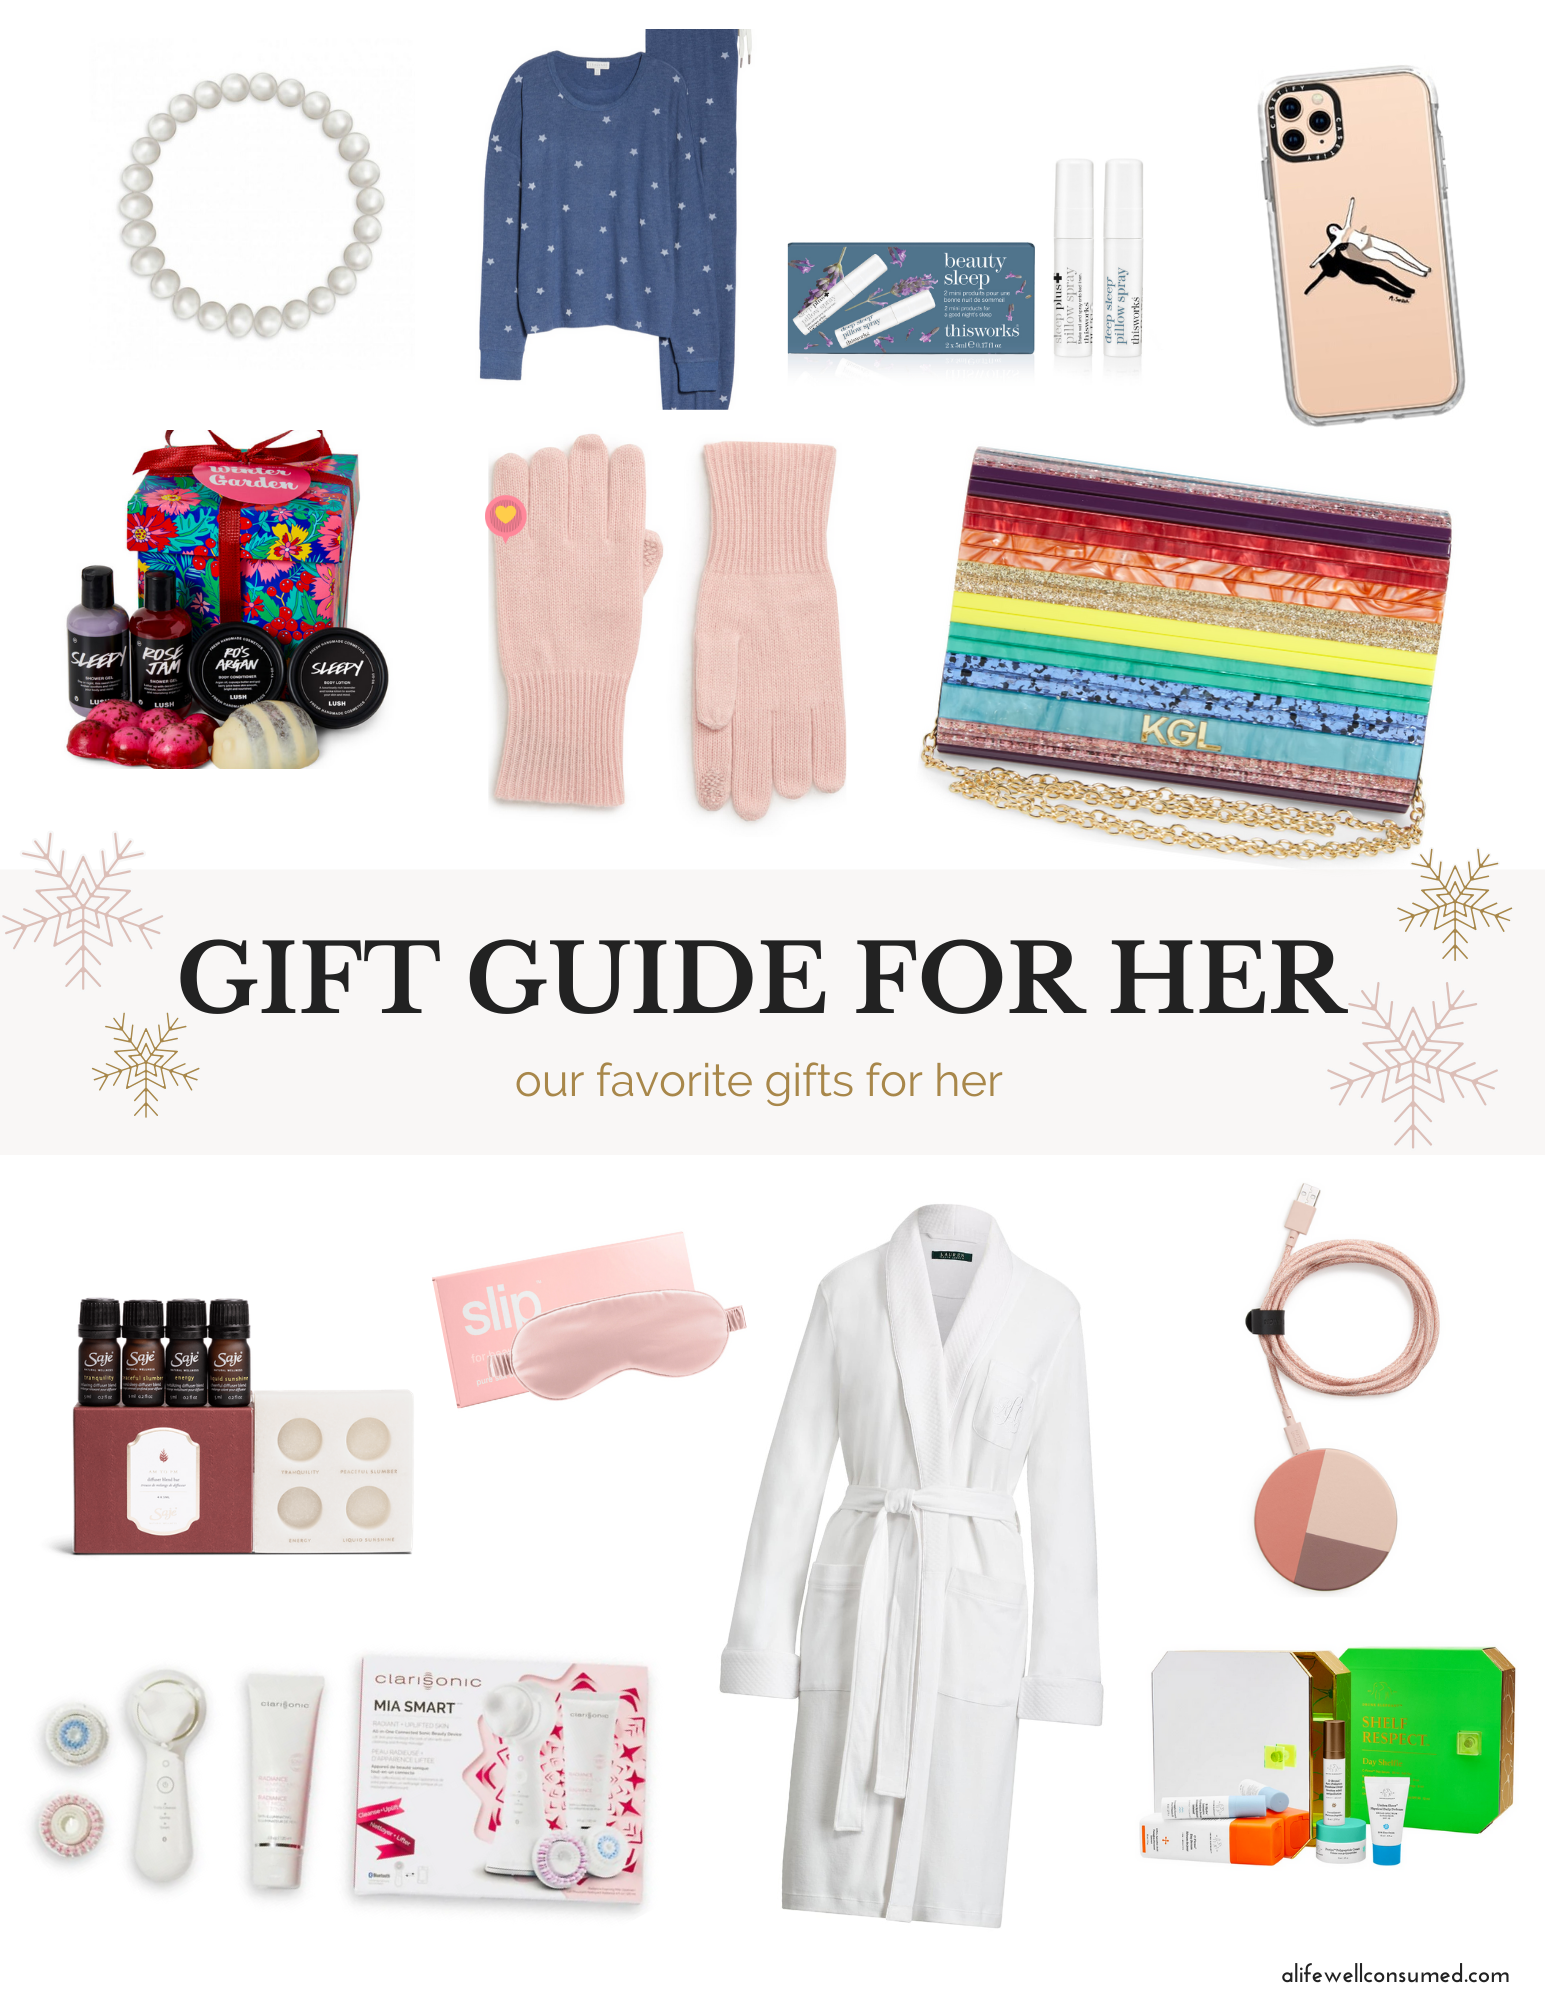 Here is my Holiday Gift Guide for Her. There are 25 gifts all from